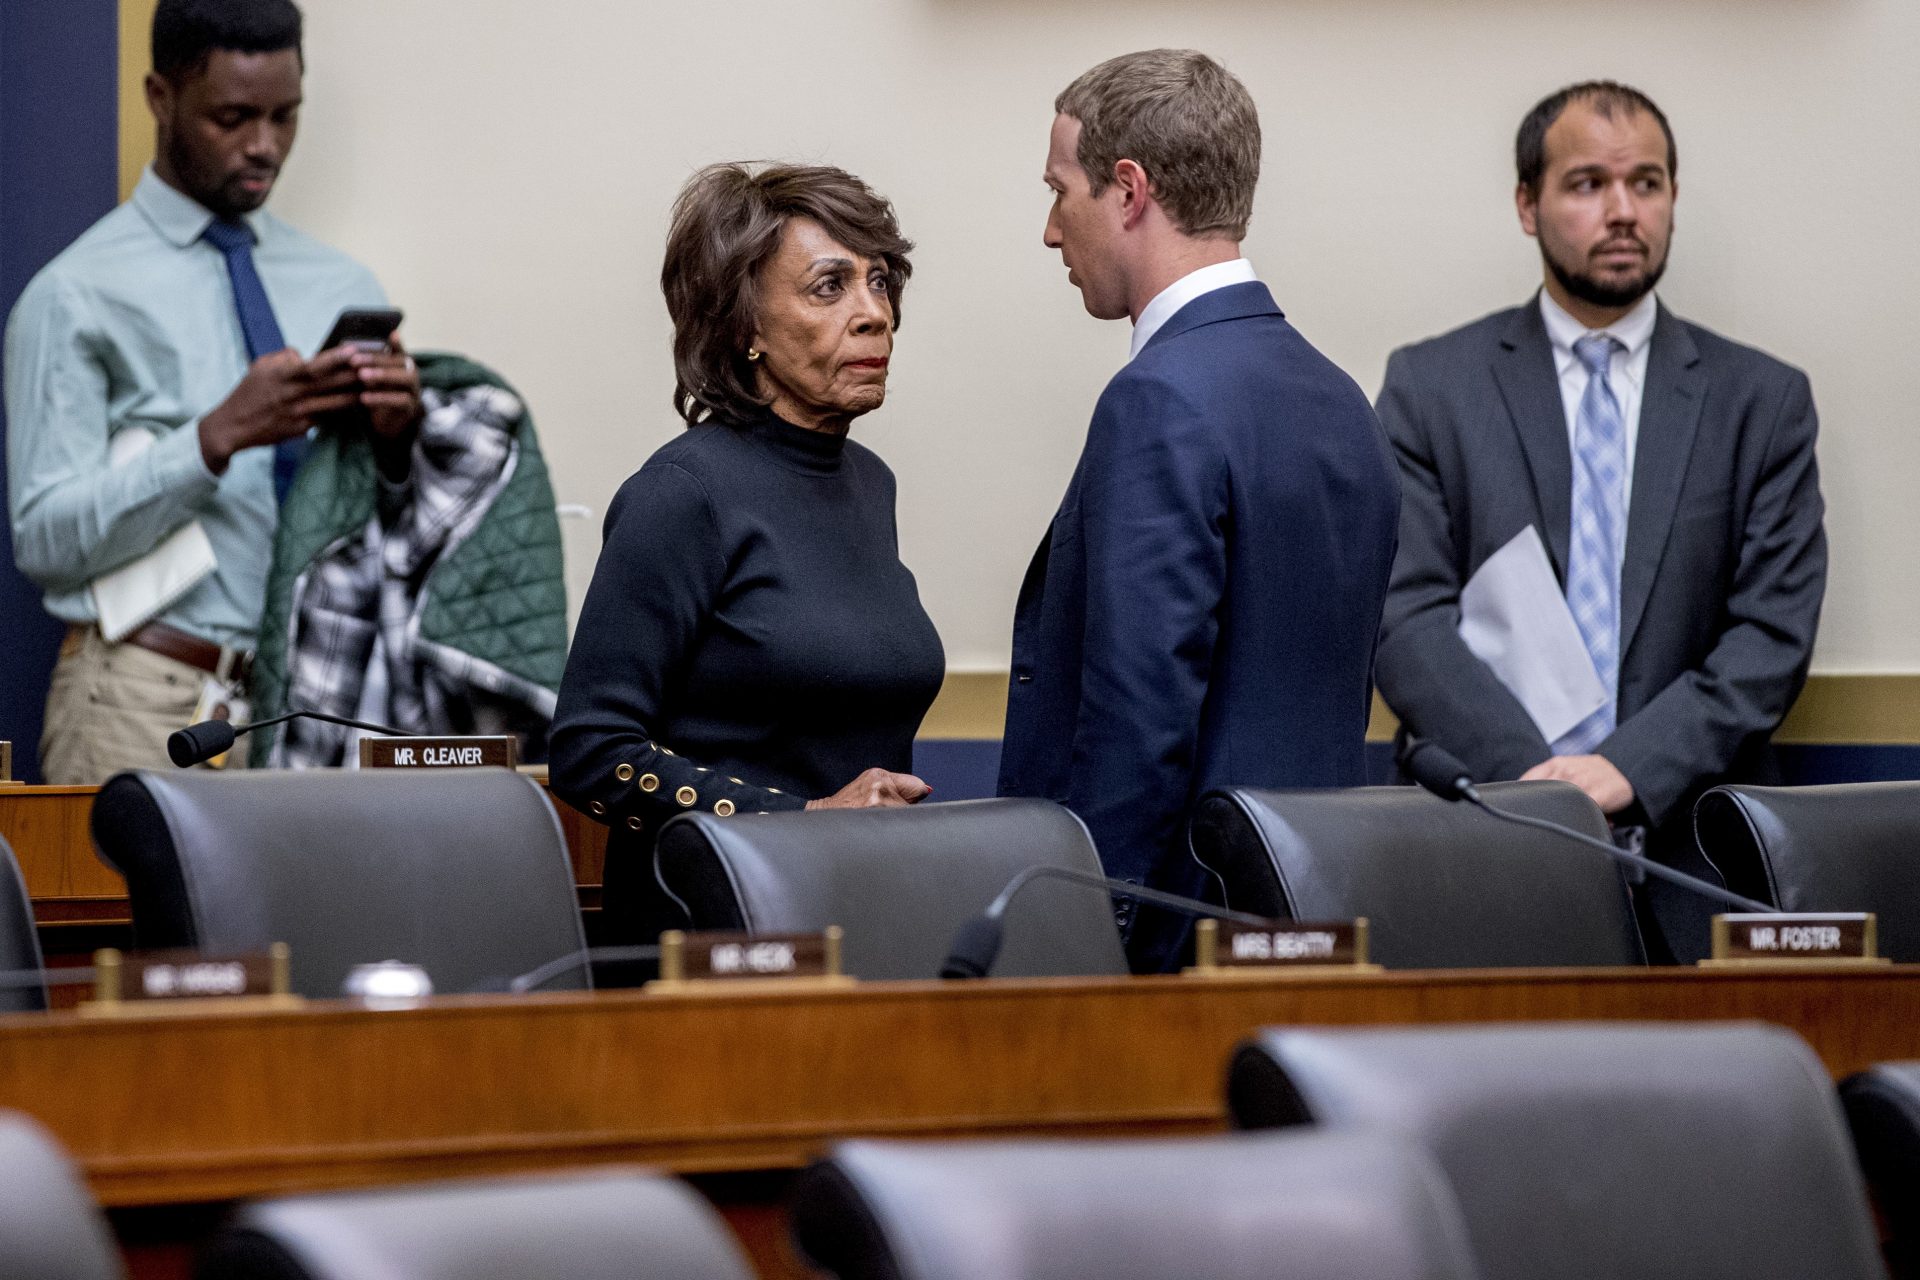 Chairwoman Rep. Maxine Waters, D-Calif., center left, speaks with Facebook CEO Mark Zuckerberg, center right, after he testifies before a House Financial Services Committee hearing on Capitol Hill in Washington, Wednesday, Oct. 23, 2019, on Facebook's impact on the financial services and housing sectors.